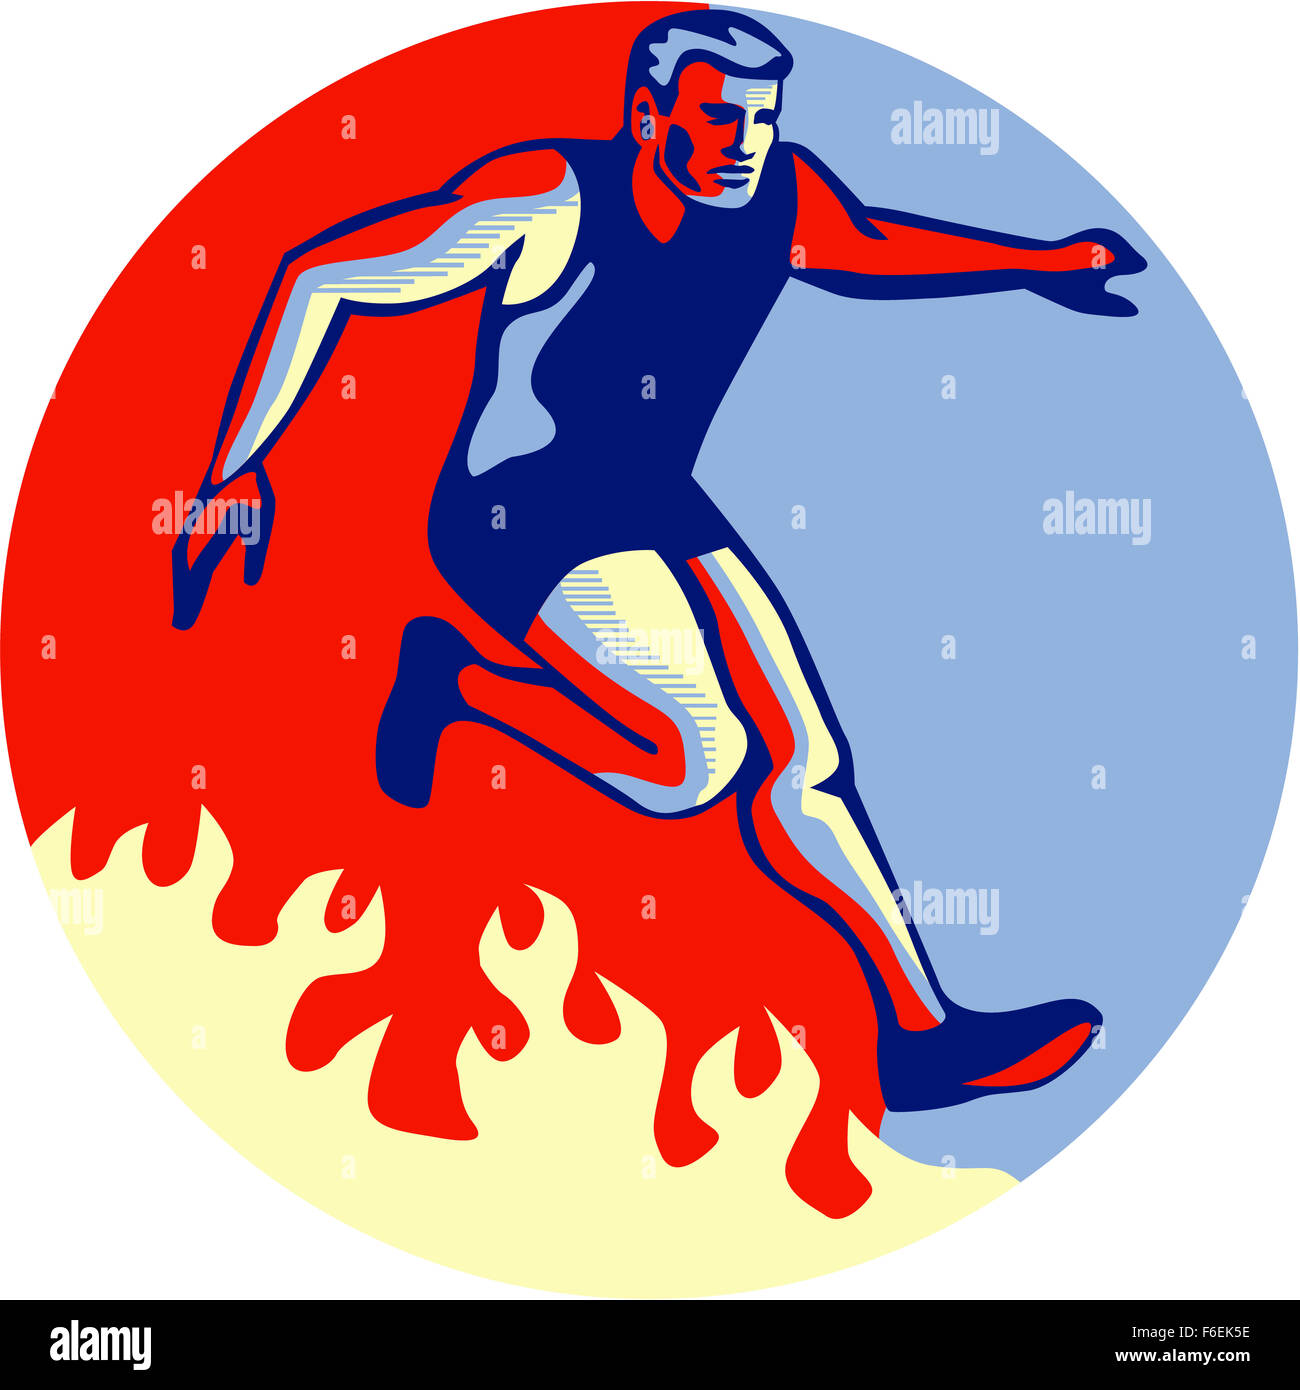 Illustration of an athlete in obstacle course racing jumping over fire set inside circle done in retro style. Stock Photo